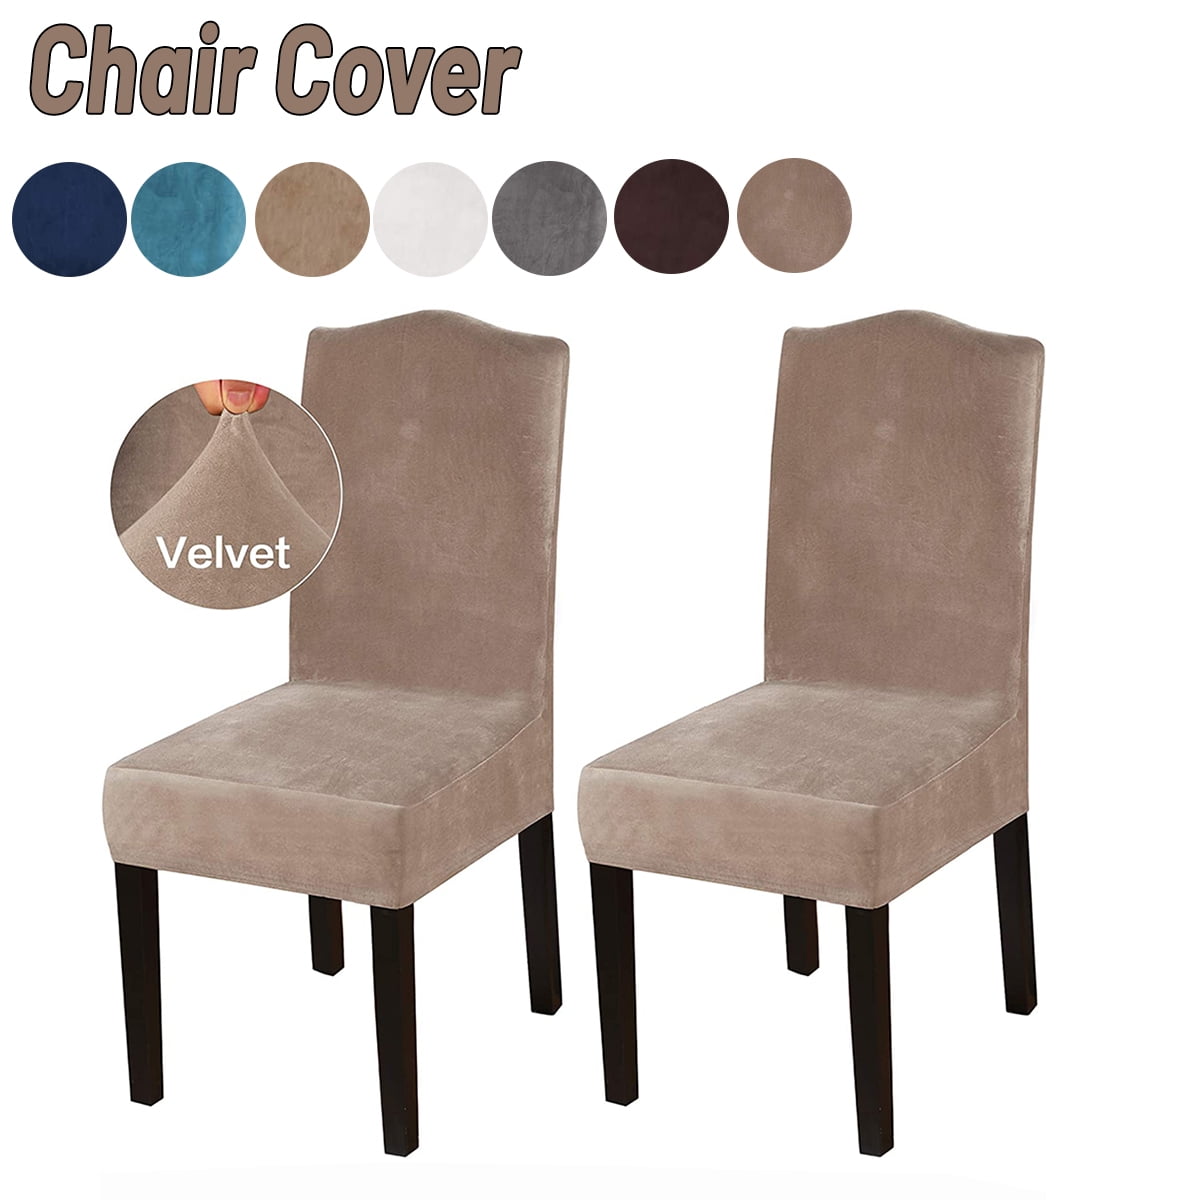 Details about   1-8x Stretch Velvet Chair Cover Banquet Dining Room Seat Slipcovers Home Decor